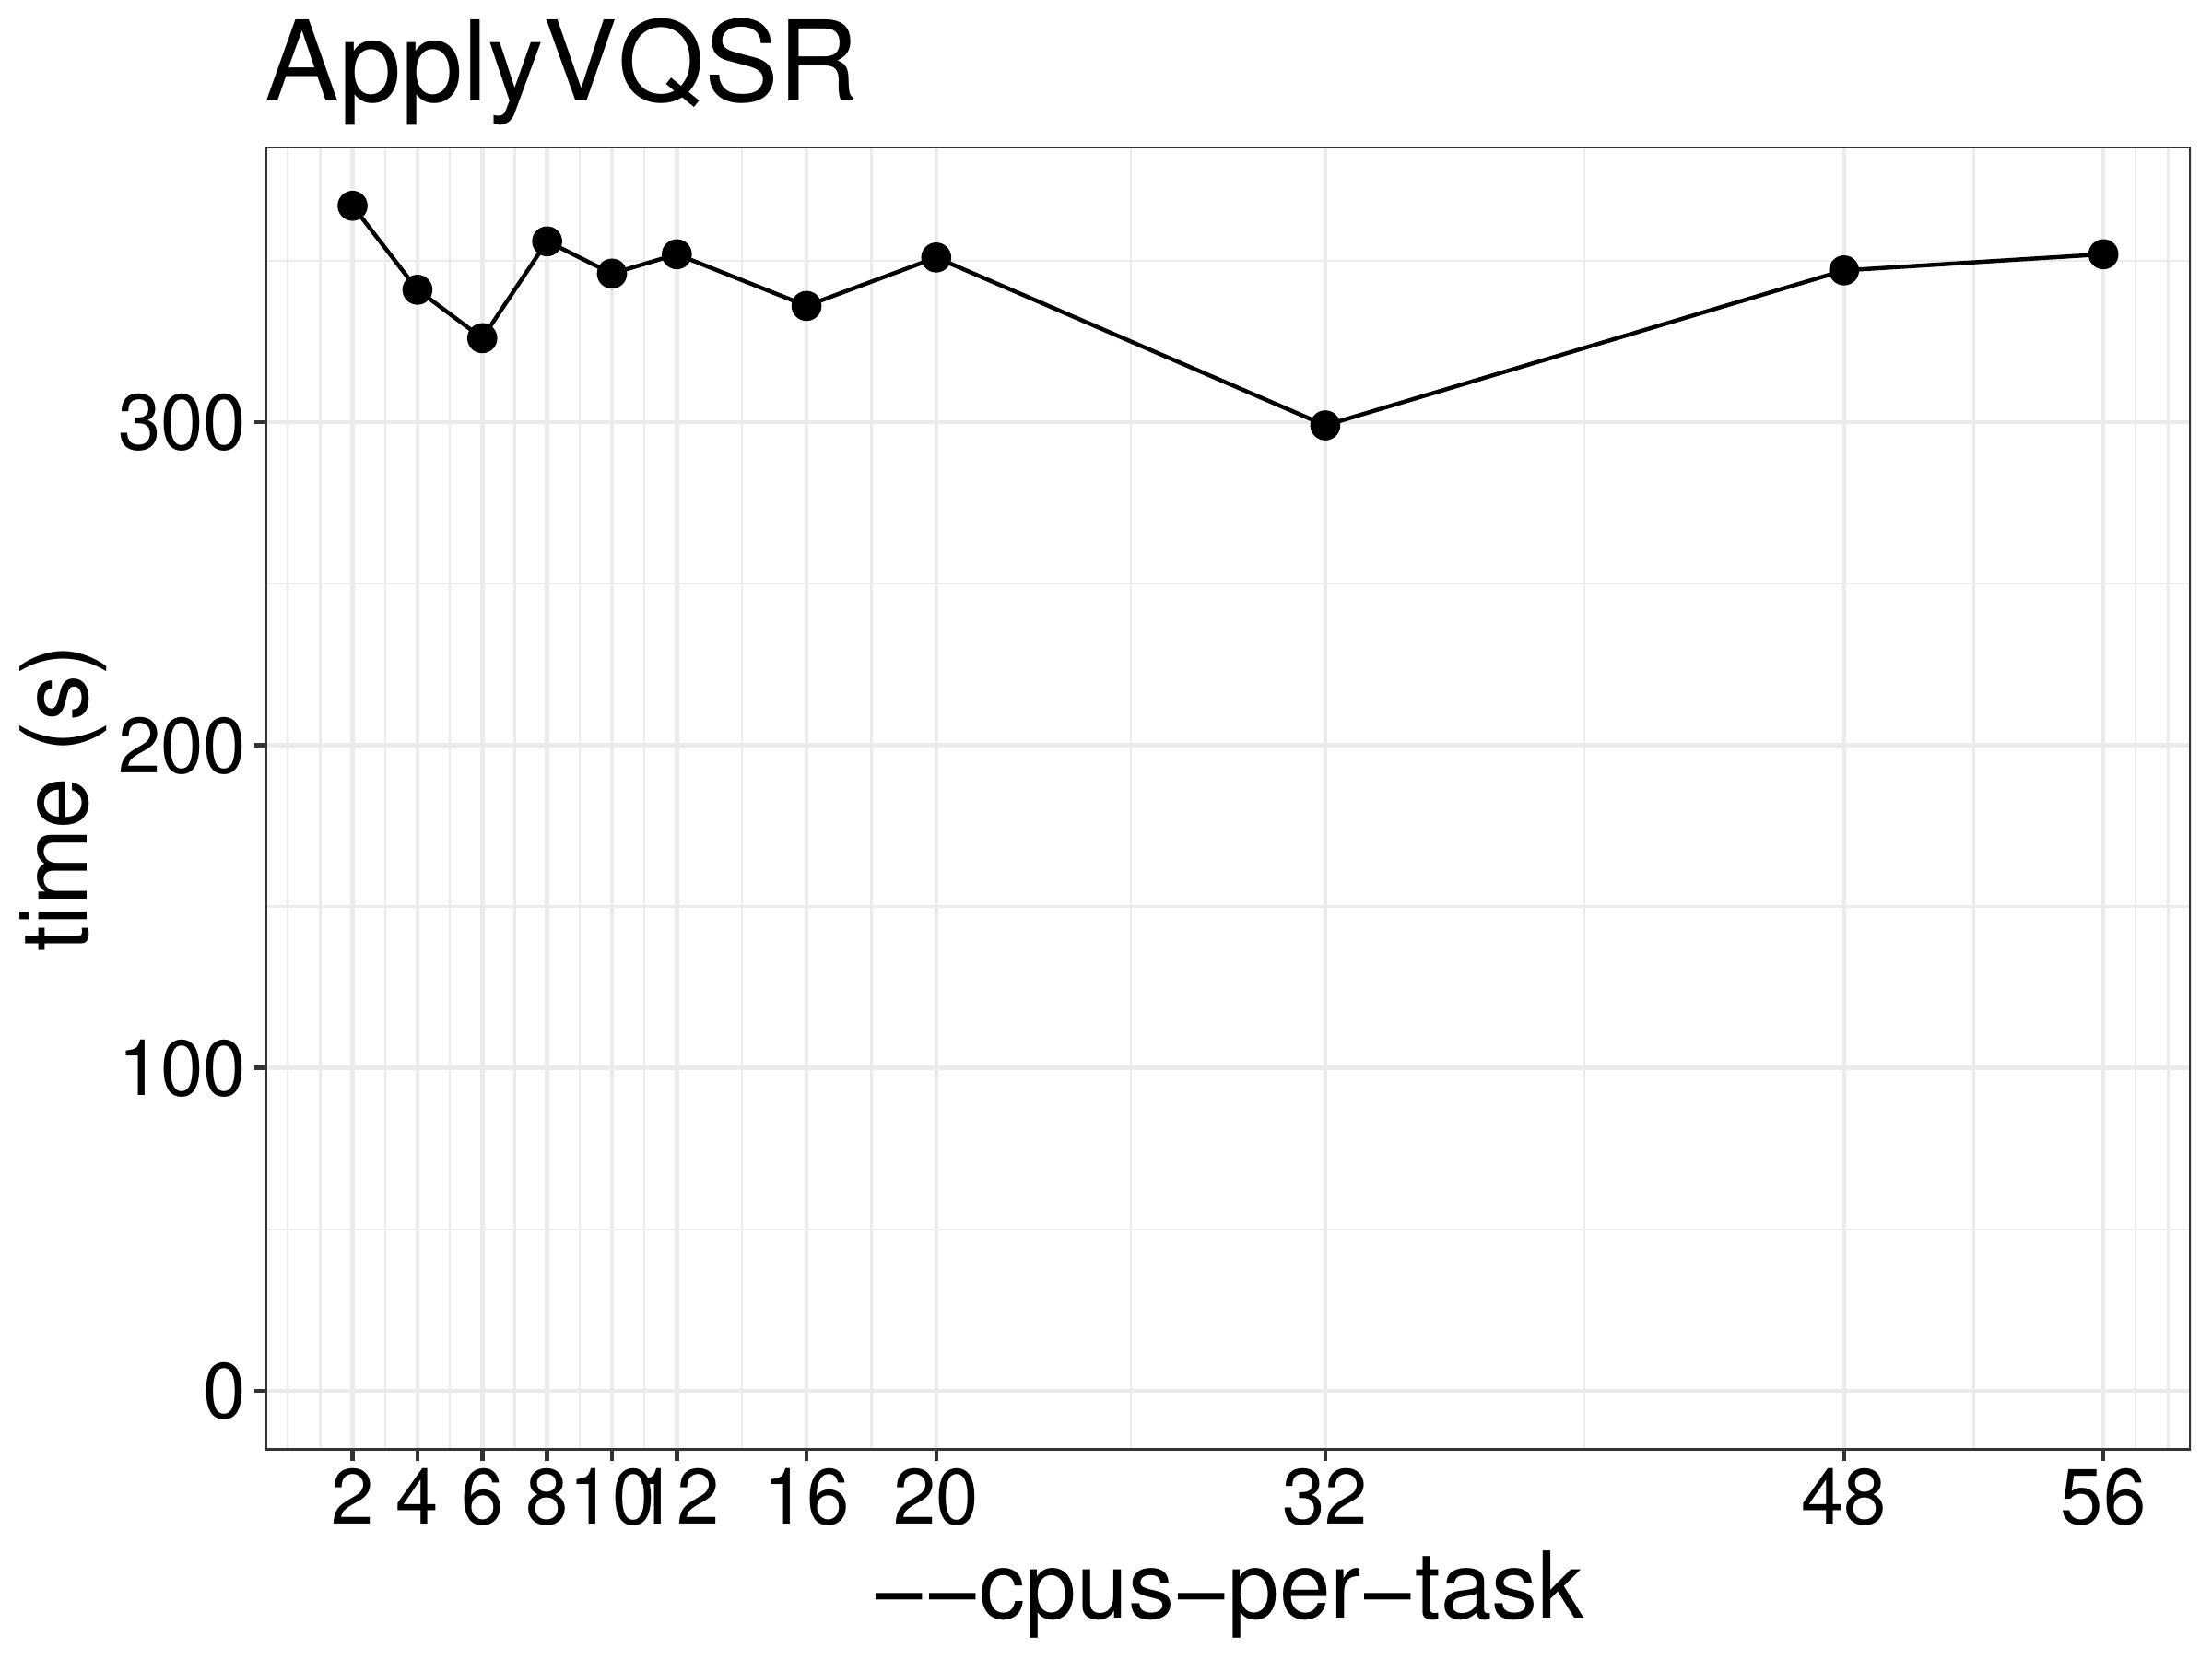 Runtime of ApplyVQSR as a function of the number of threads